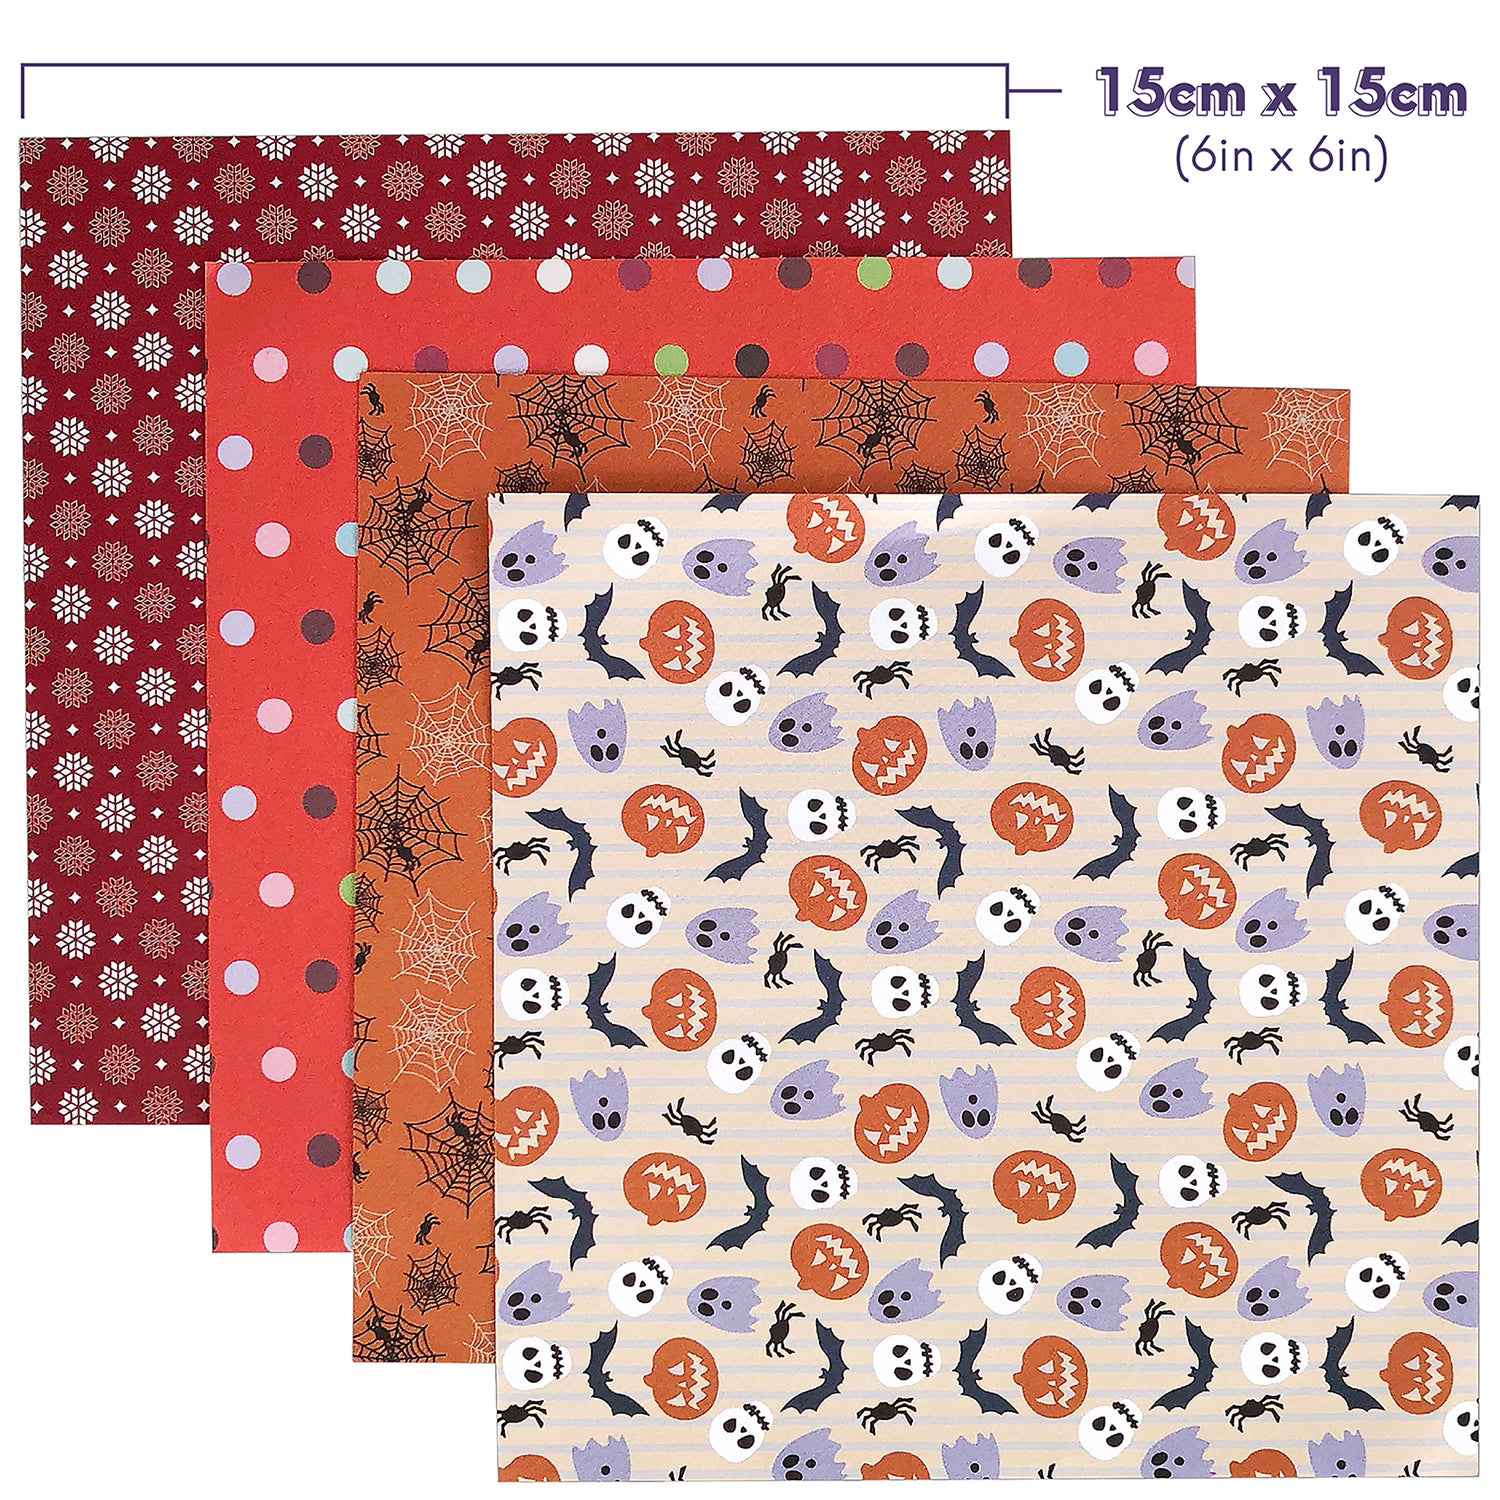 Floral Print Gift Wrapping Paper Sheet, GSM: 80 - 120, Packaging